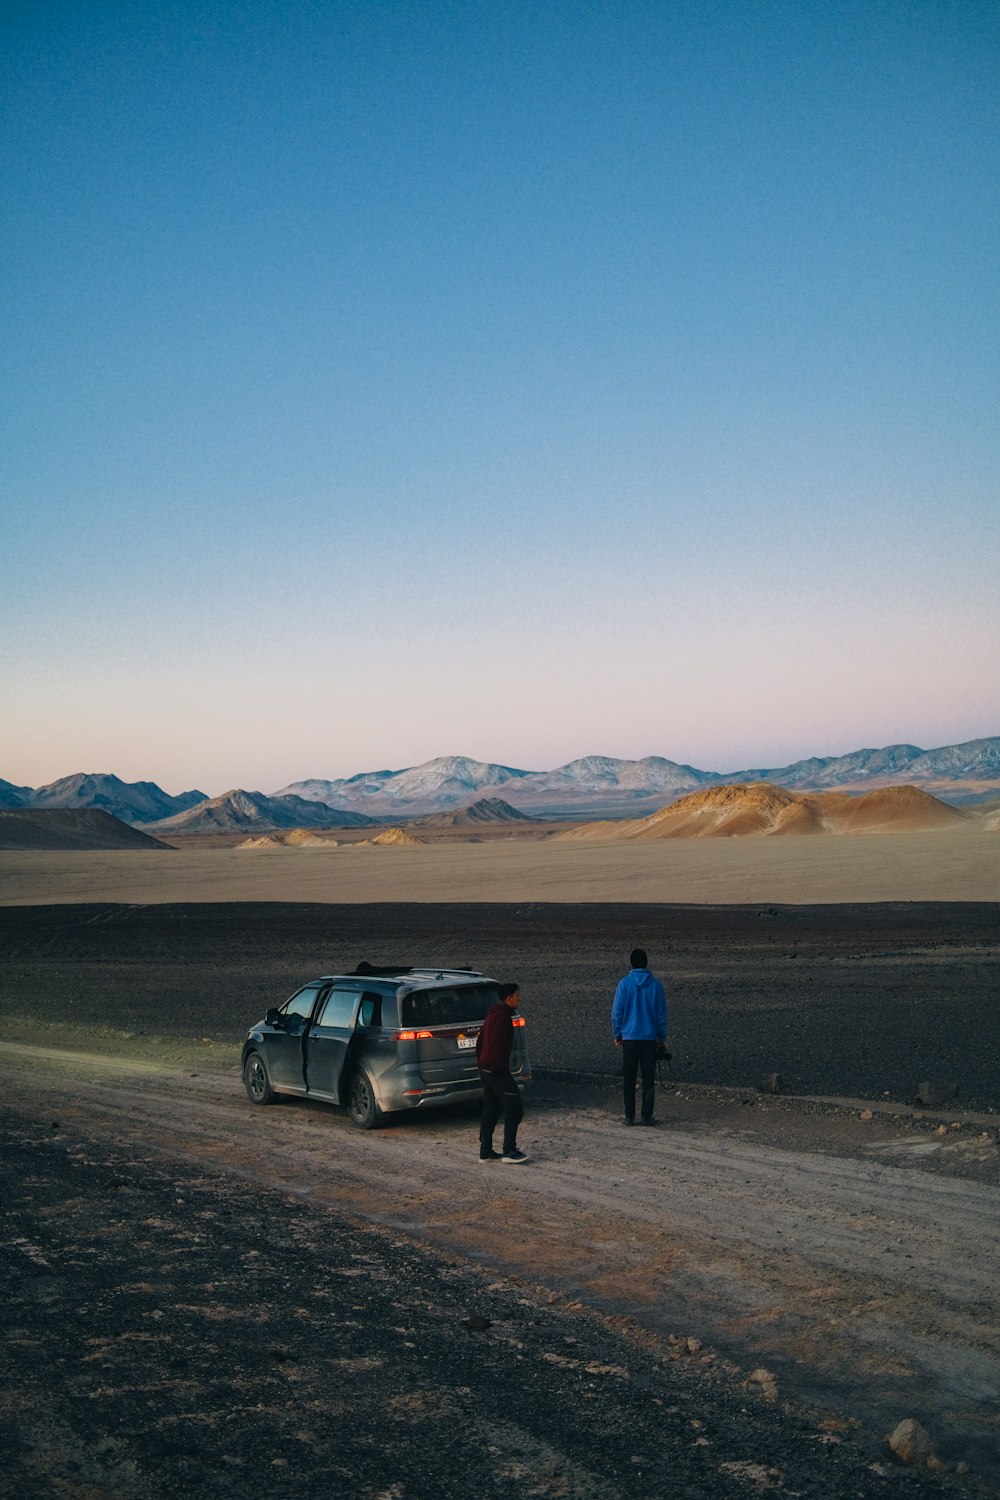 a couple of people standing next to a car in a desert